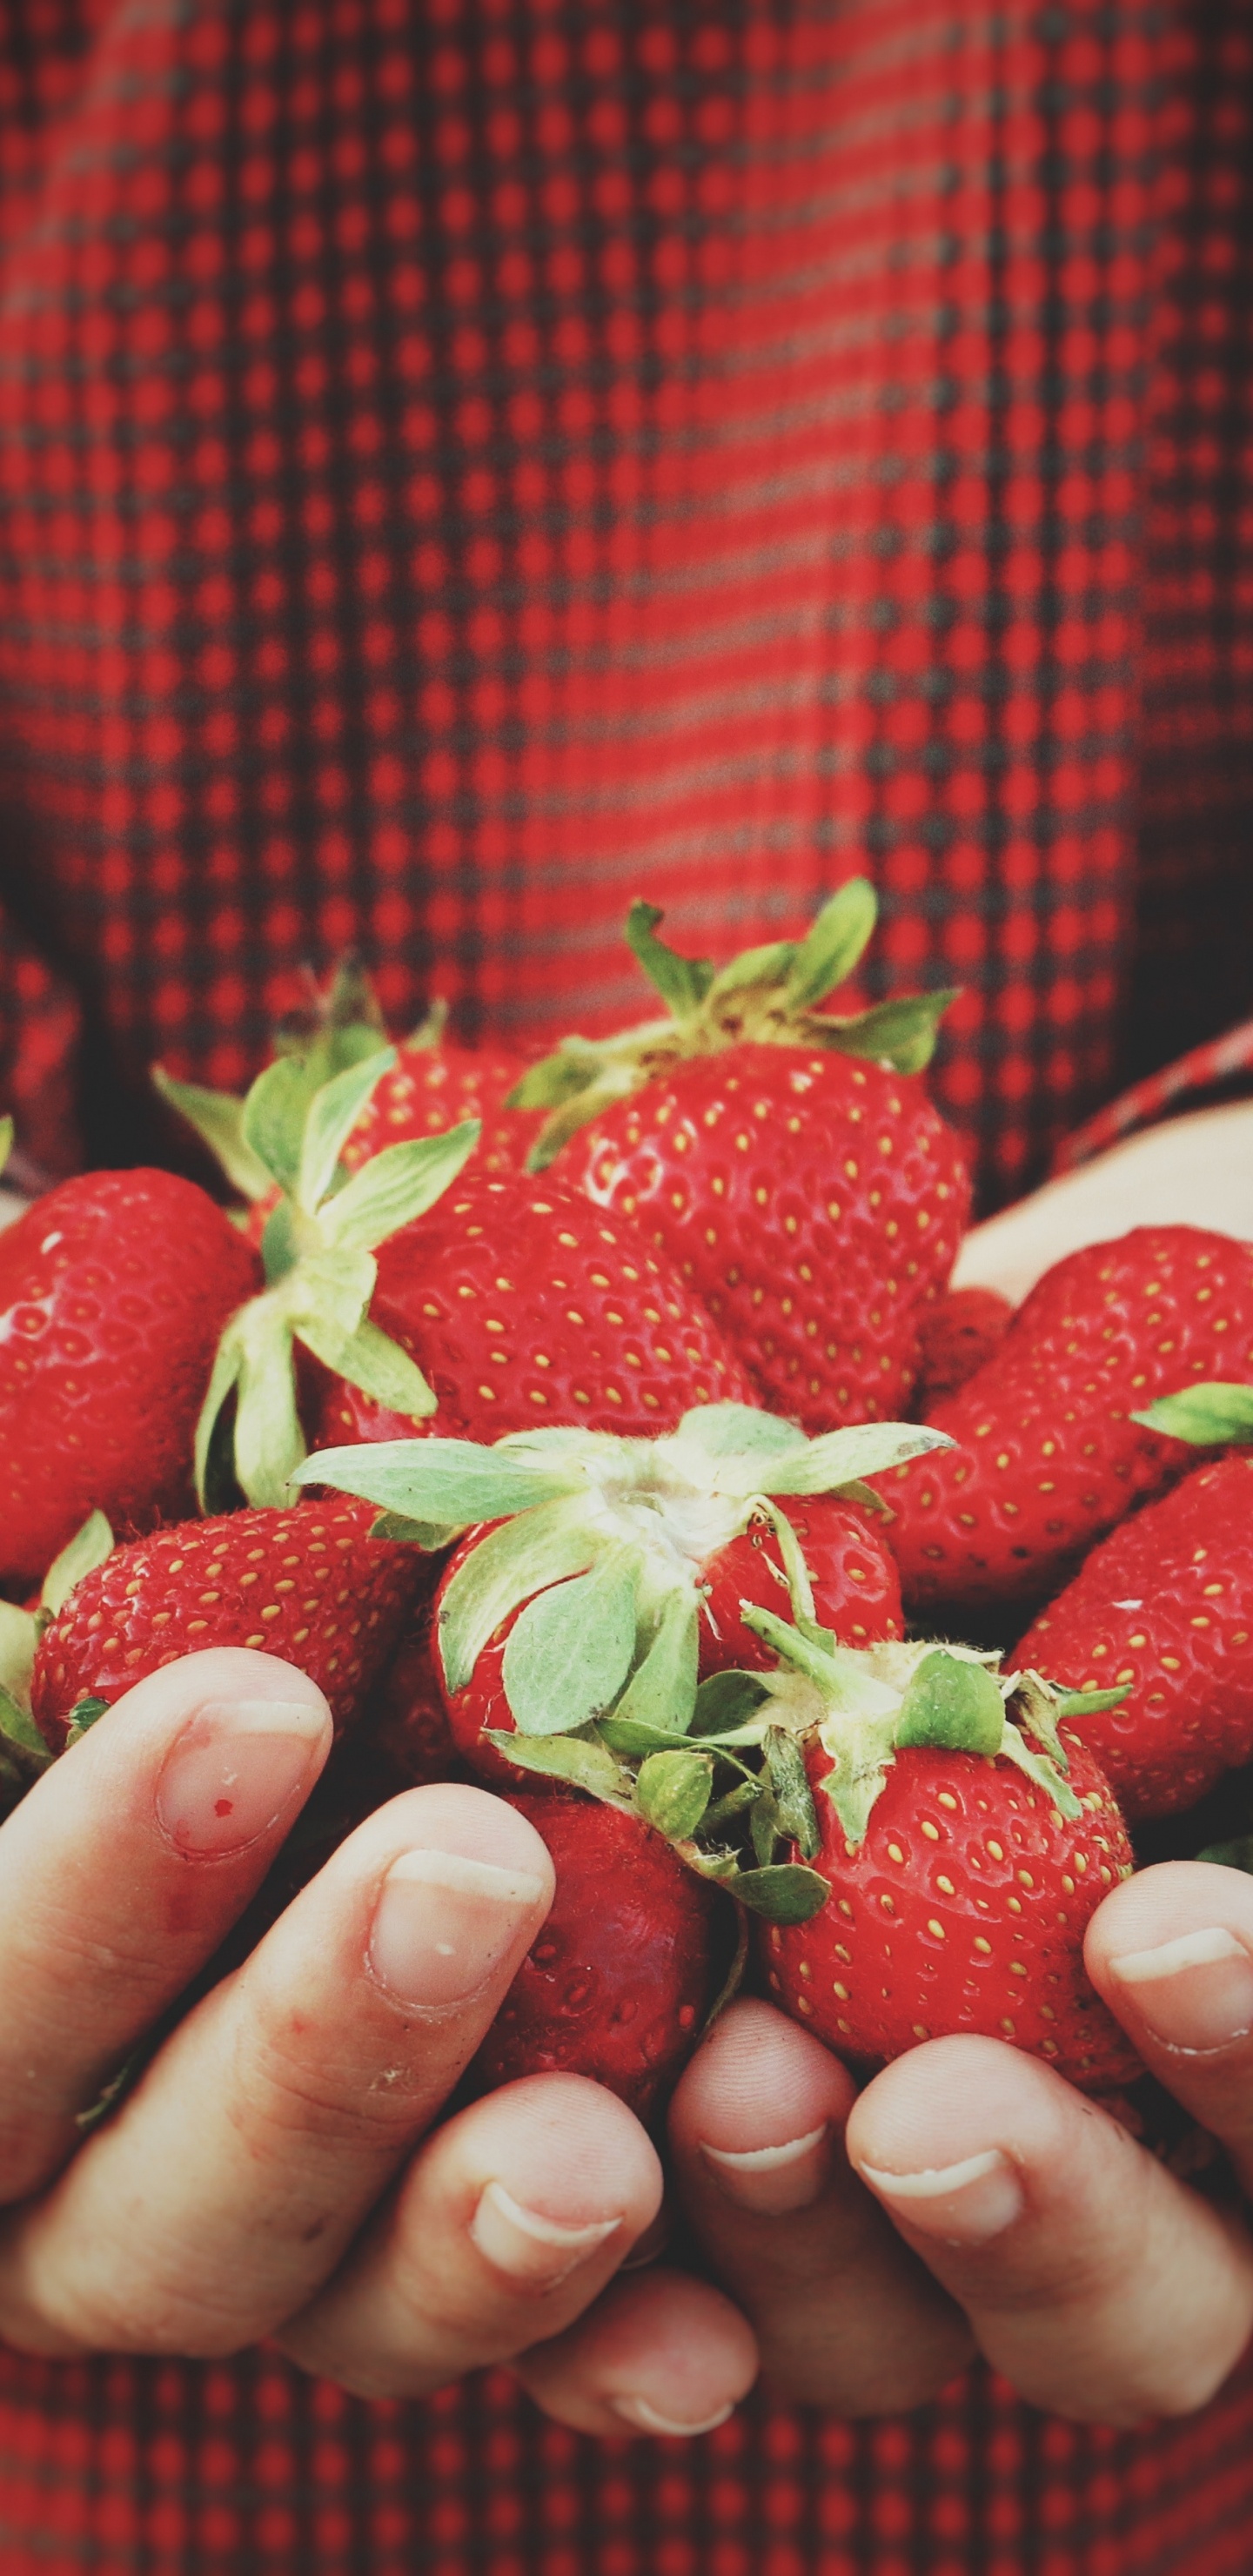 Person Holding Strawberries on Hand. Wallpaper in 1440x2960 Resolution